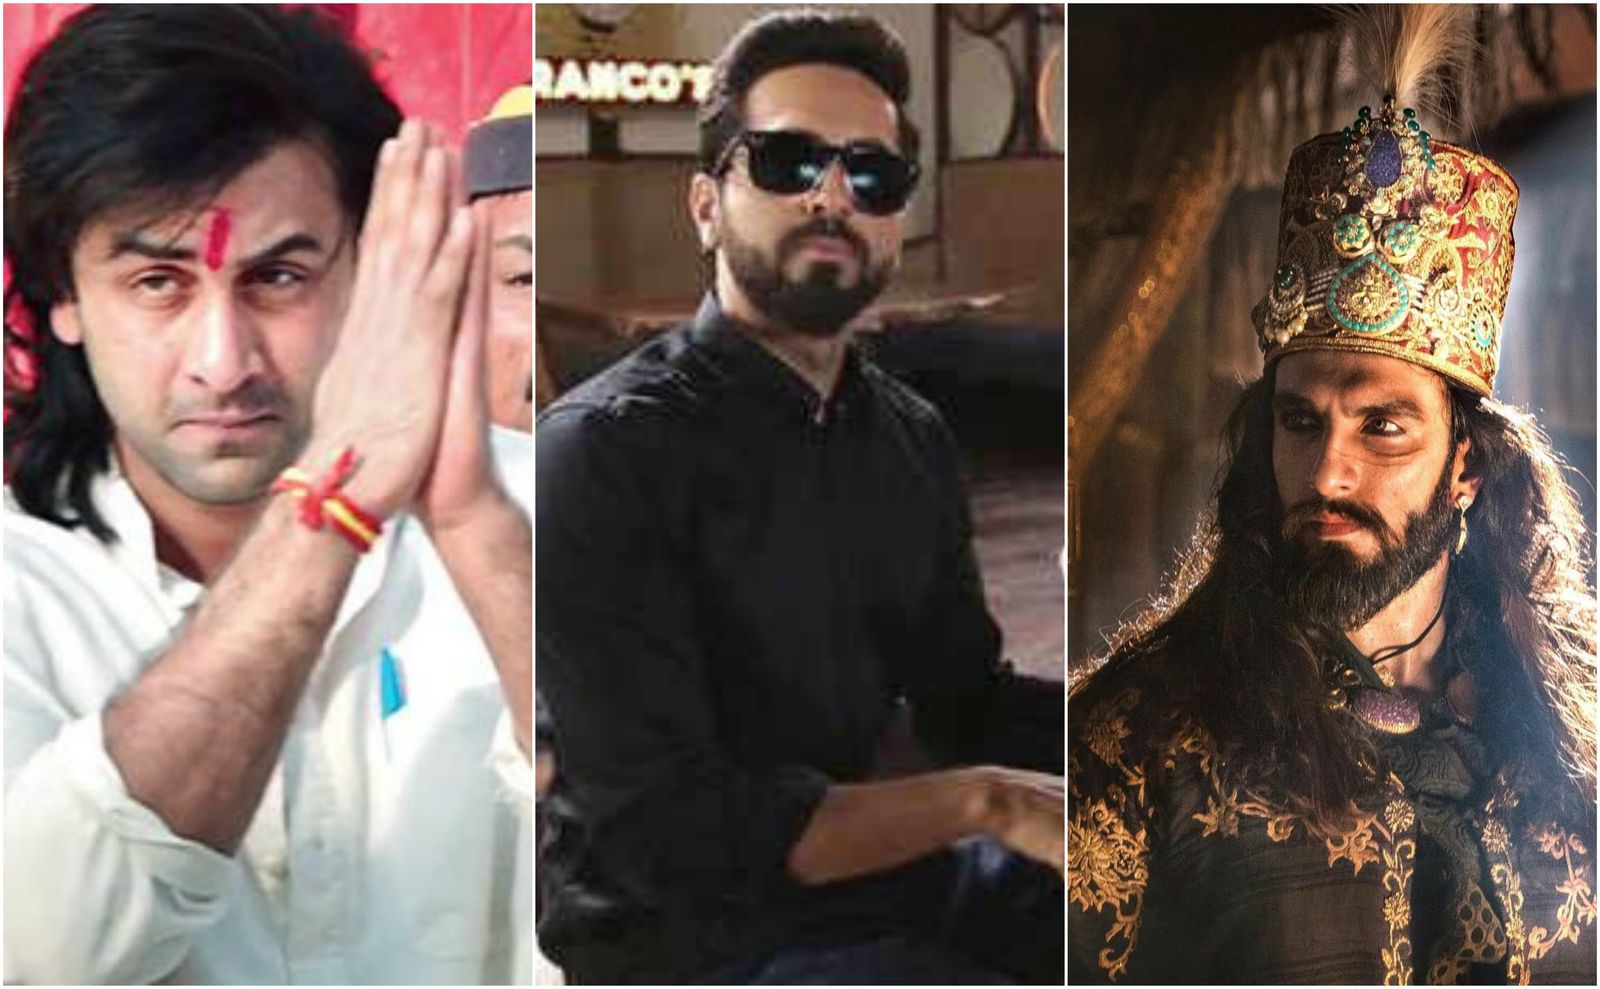 RANKED: Leading Men Of Bollywood According To Their Performances In 2018